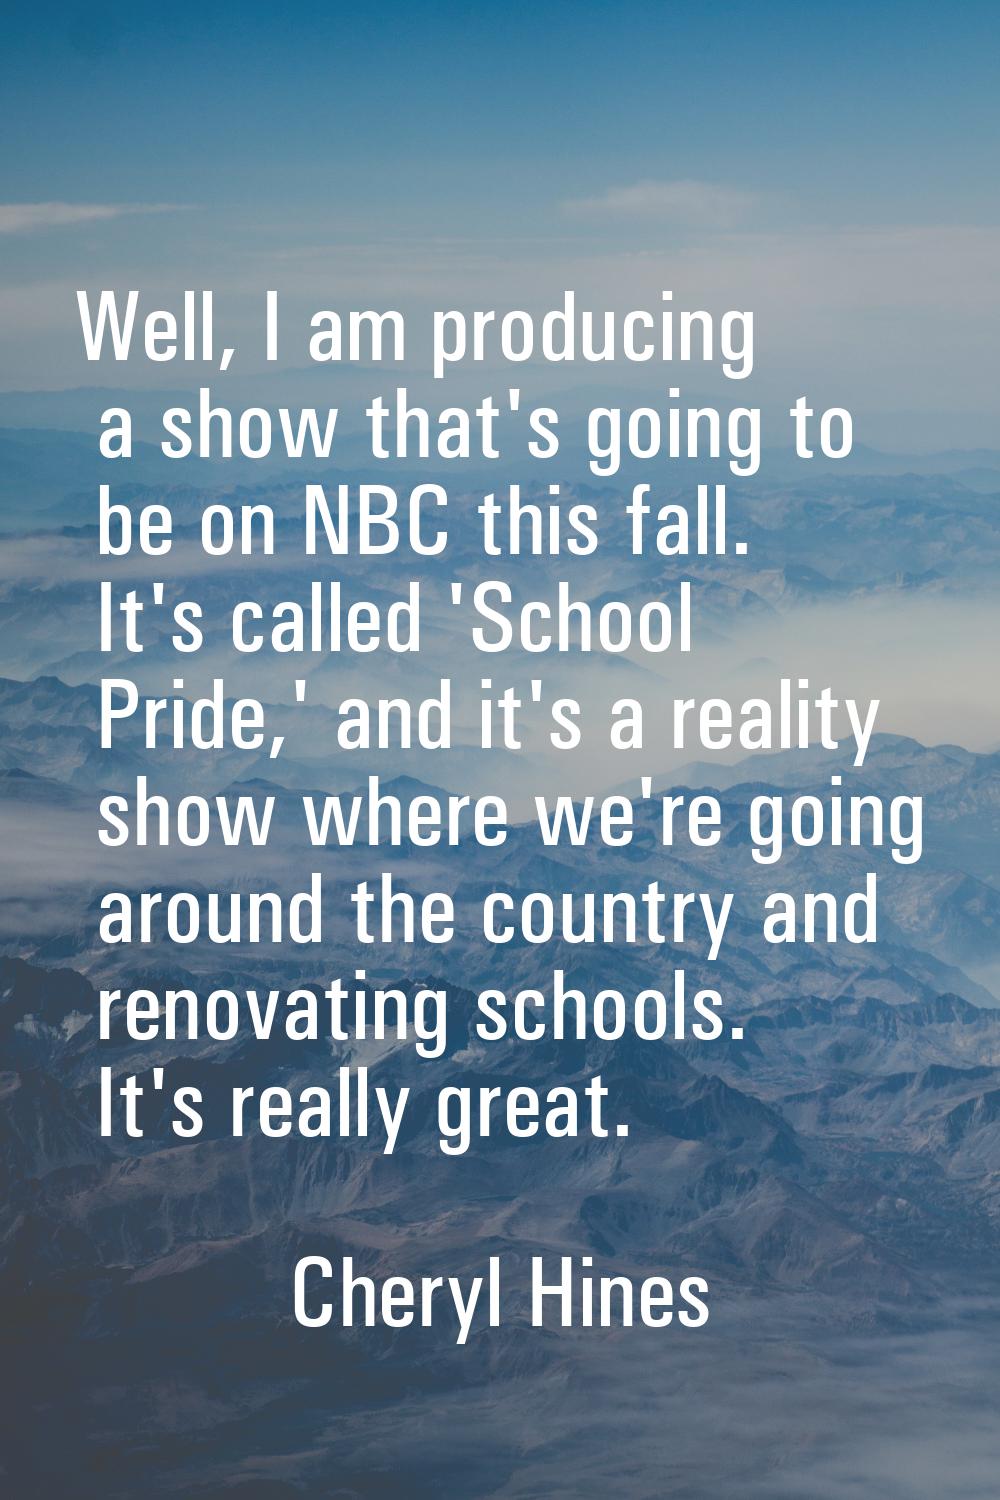 Well, I am producing a show that's going to be on NBC this fall. It's called 'School Pride,' and it